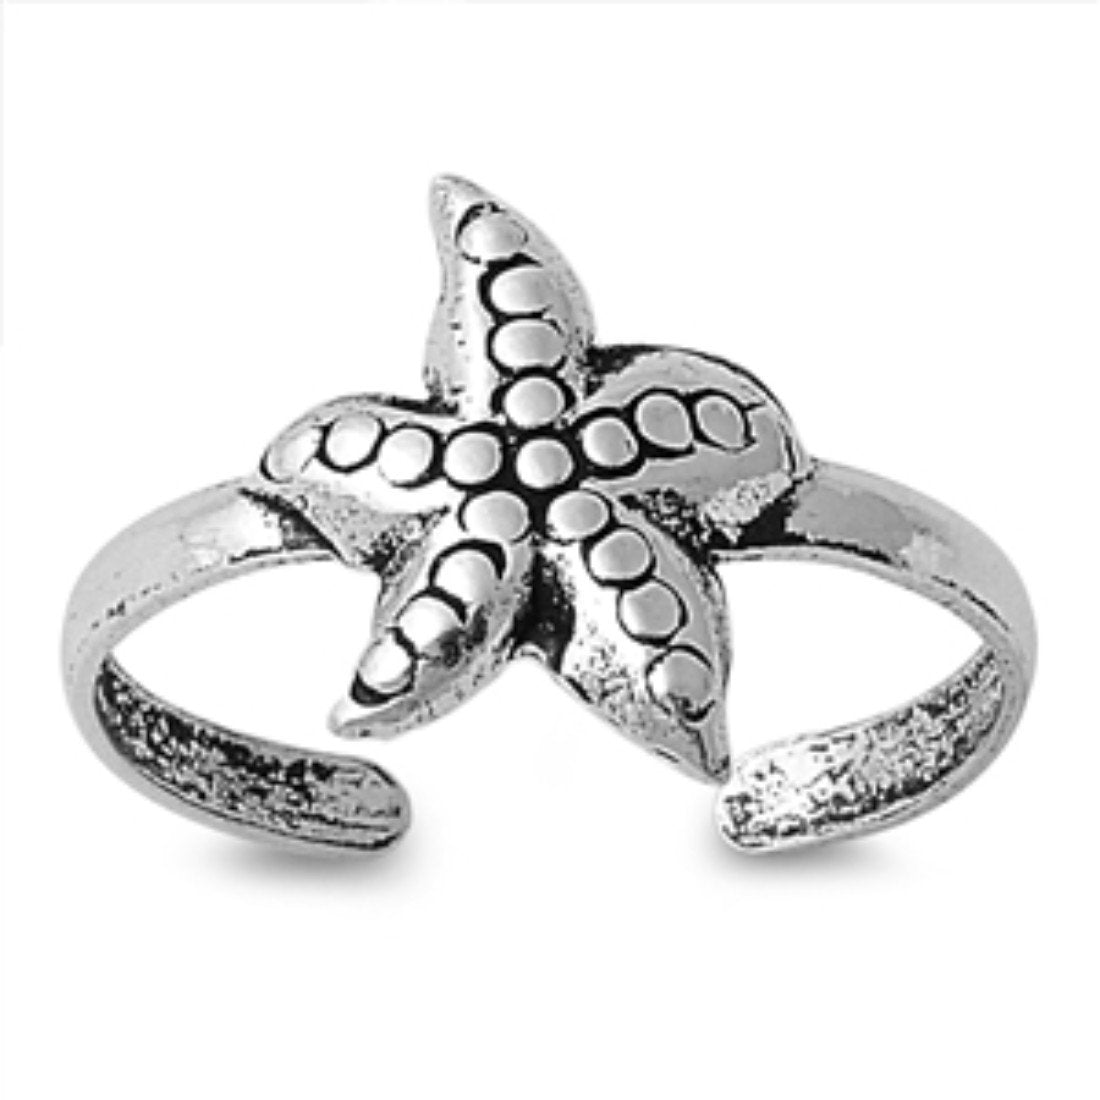 Toe Ring Starfish Silver Toe Ring 925 Sterling Silver (10mm)